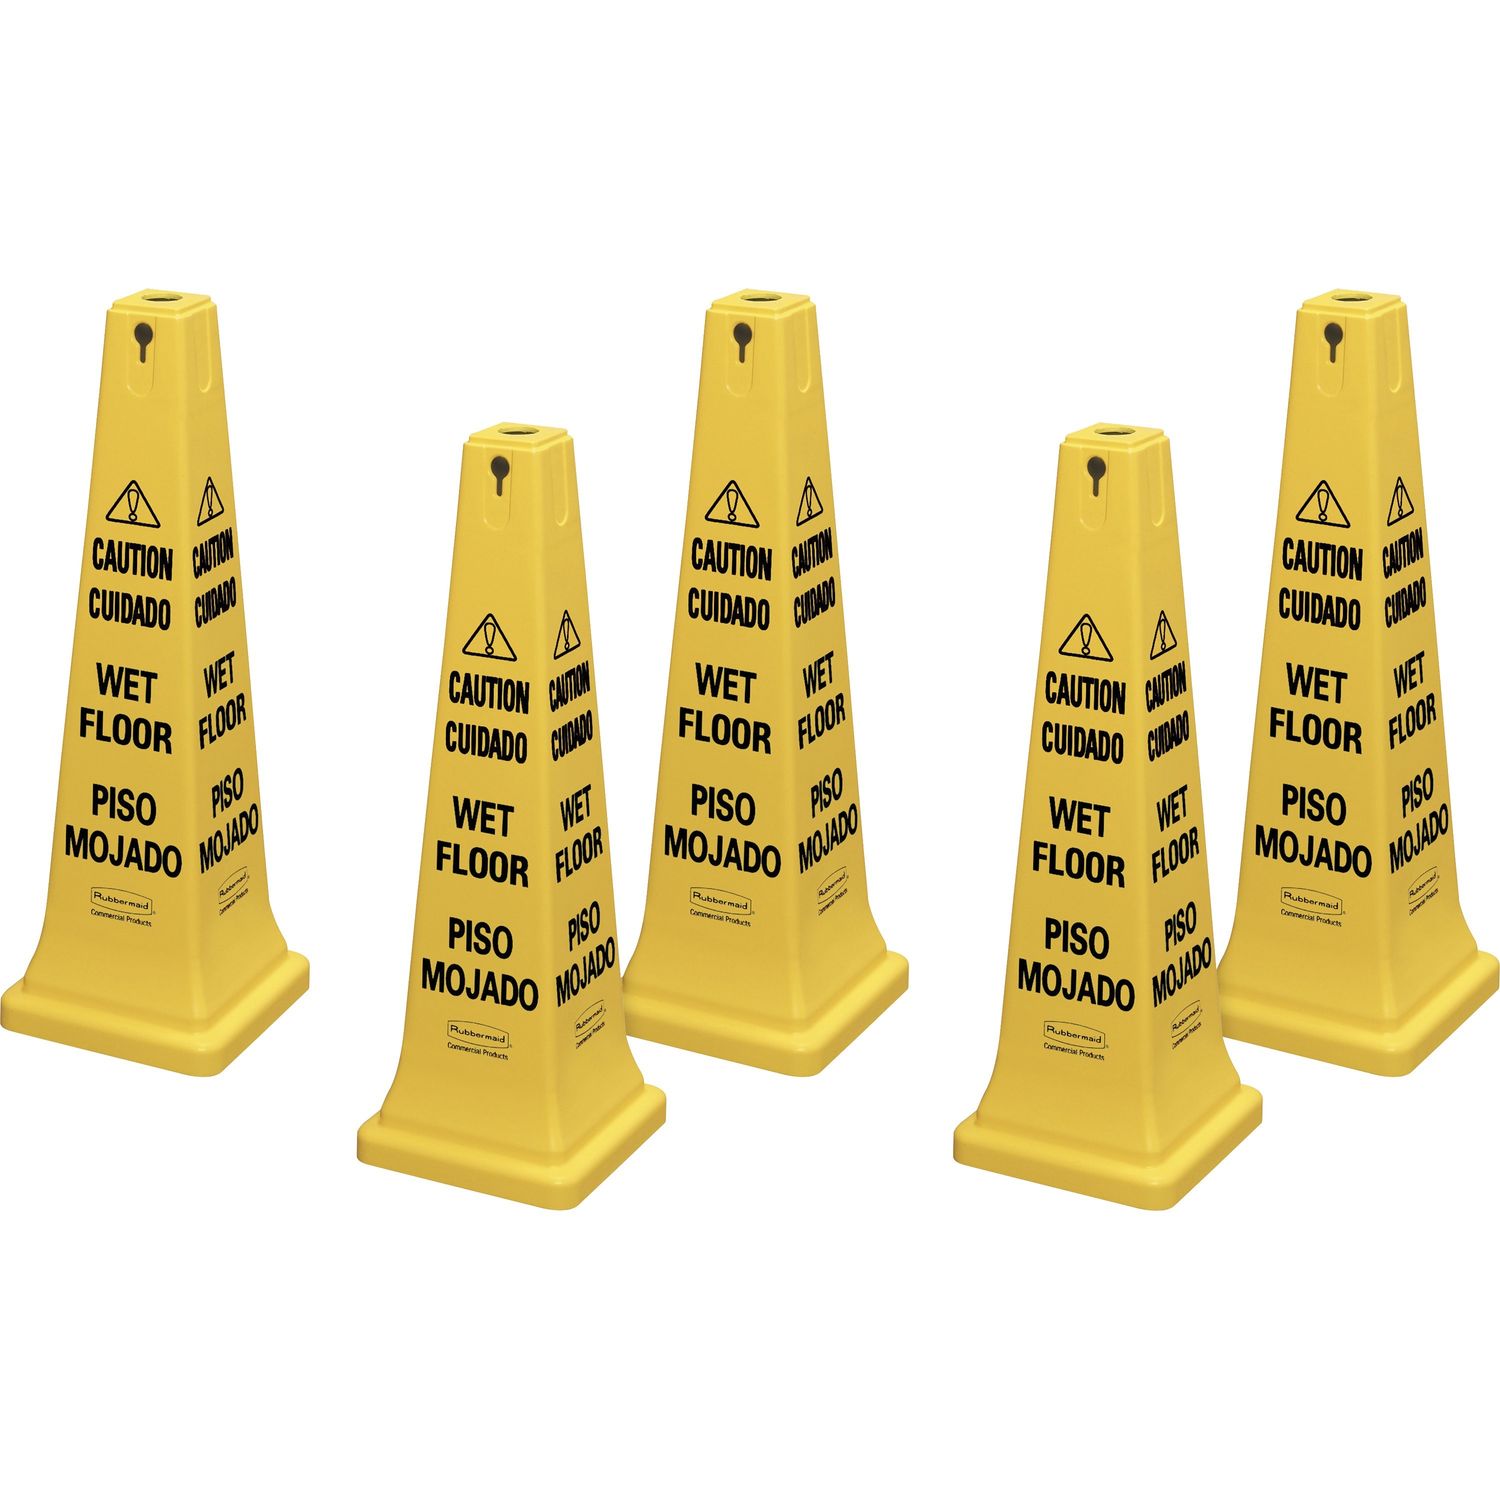 36" Safety Cone 5 / Carton, Caution, Wet Floor Print/Message, 12.2" Width x 36" Height, Cone Shape, Stackable, Sturdy, Plastic, Bright Yellow